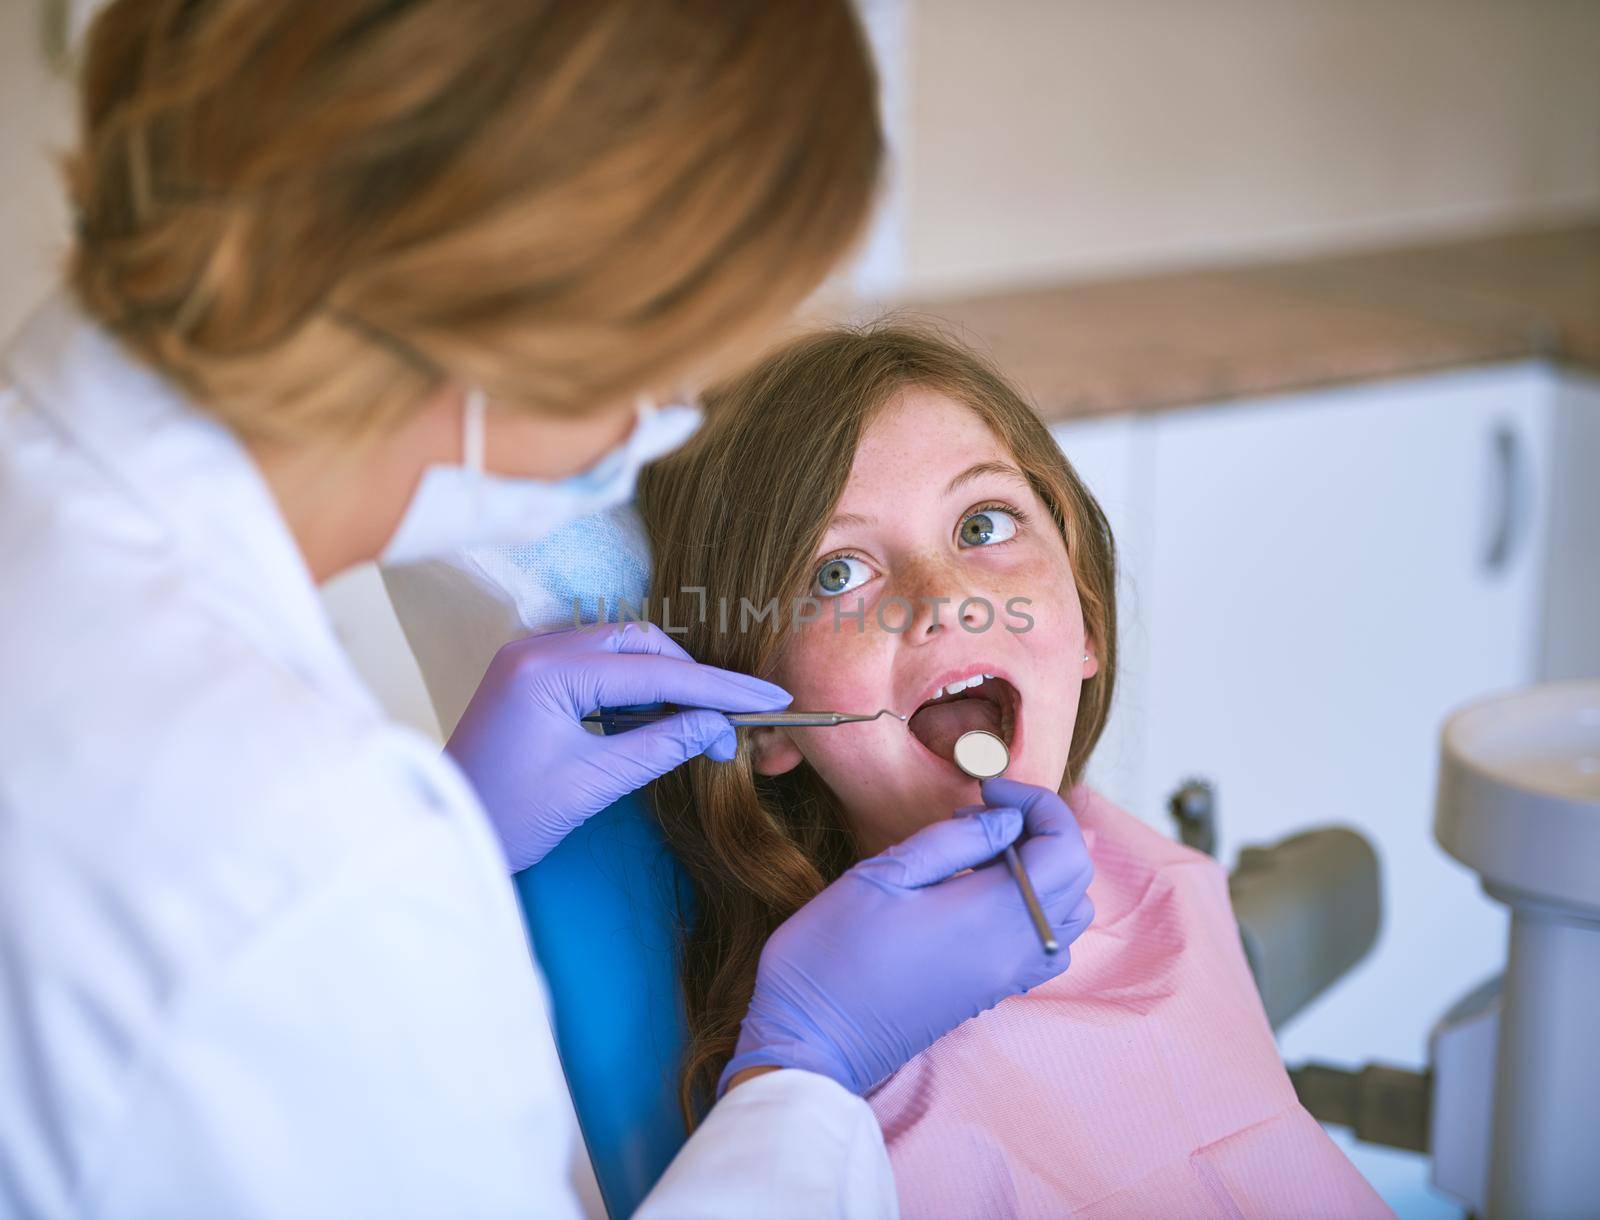 Cropped shot of a dentist examining a little girls teeth.